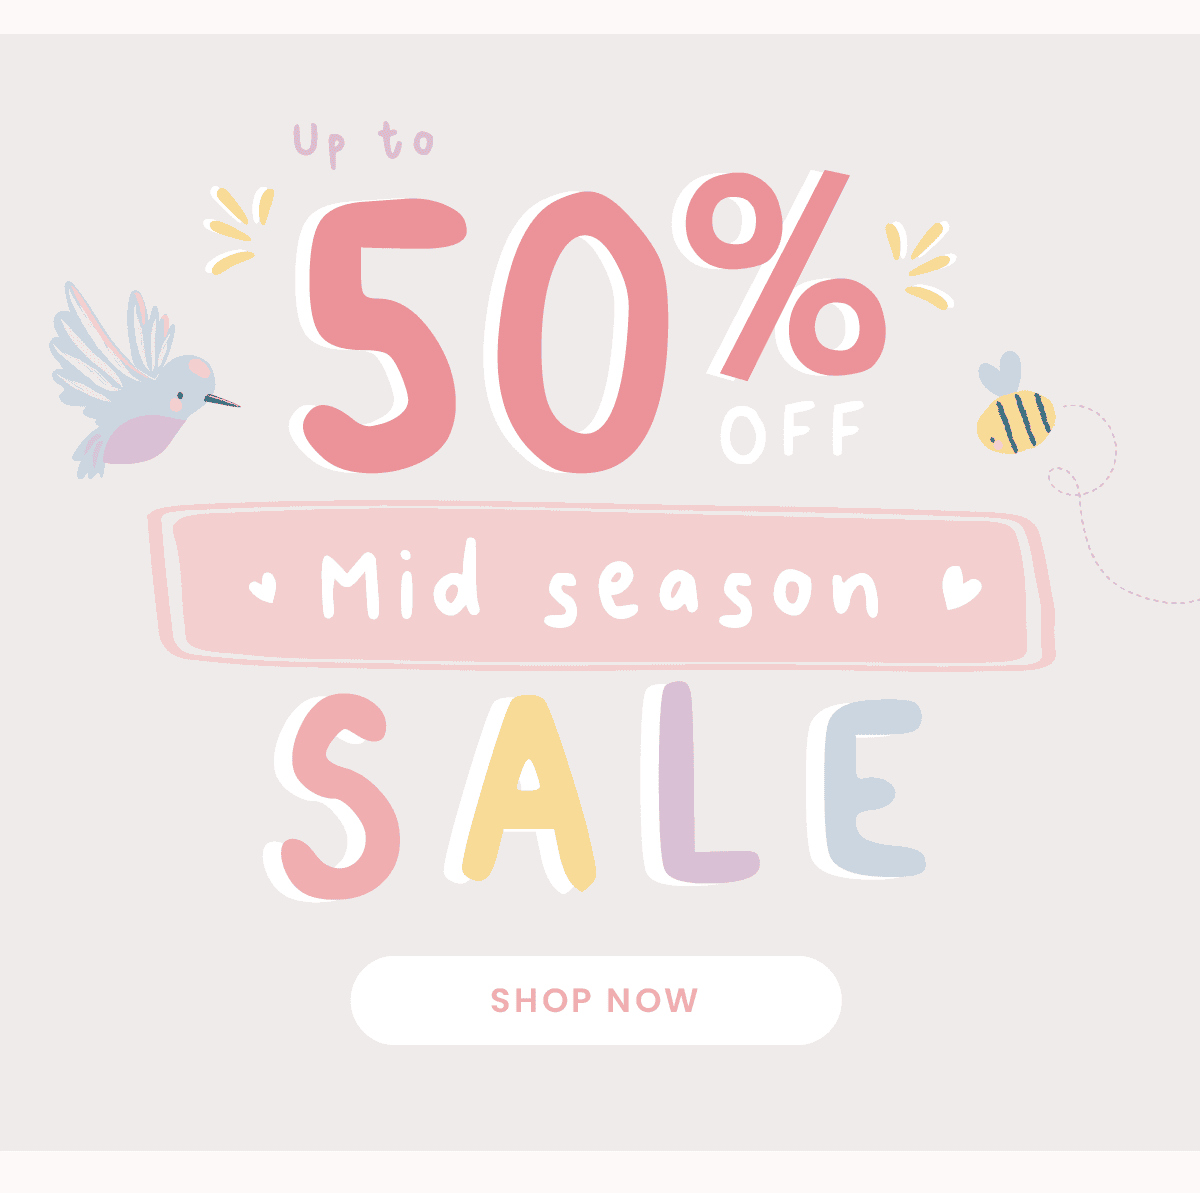 Up to 50% off in our Mid Season Sale